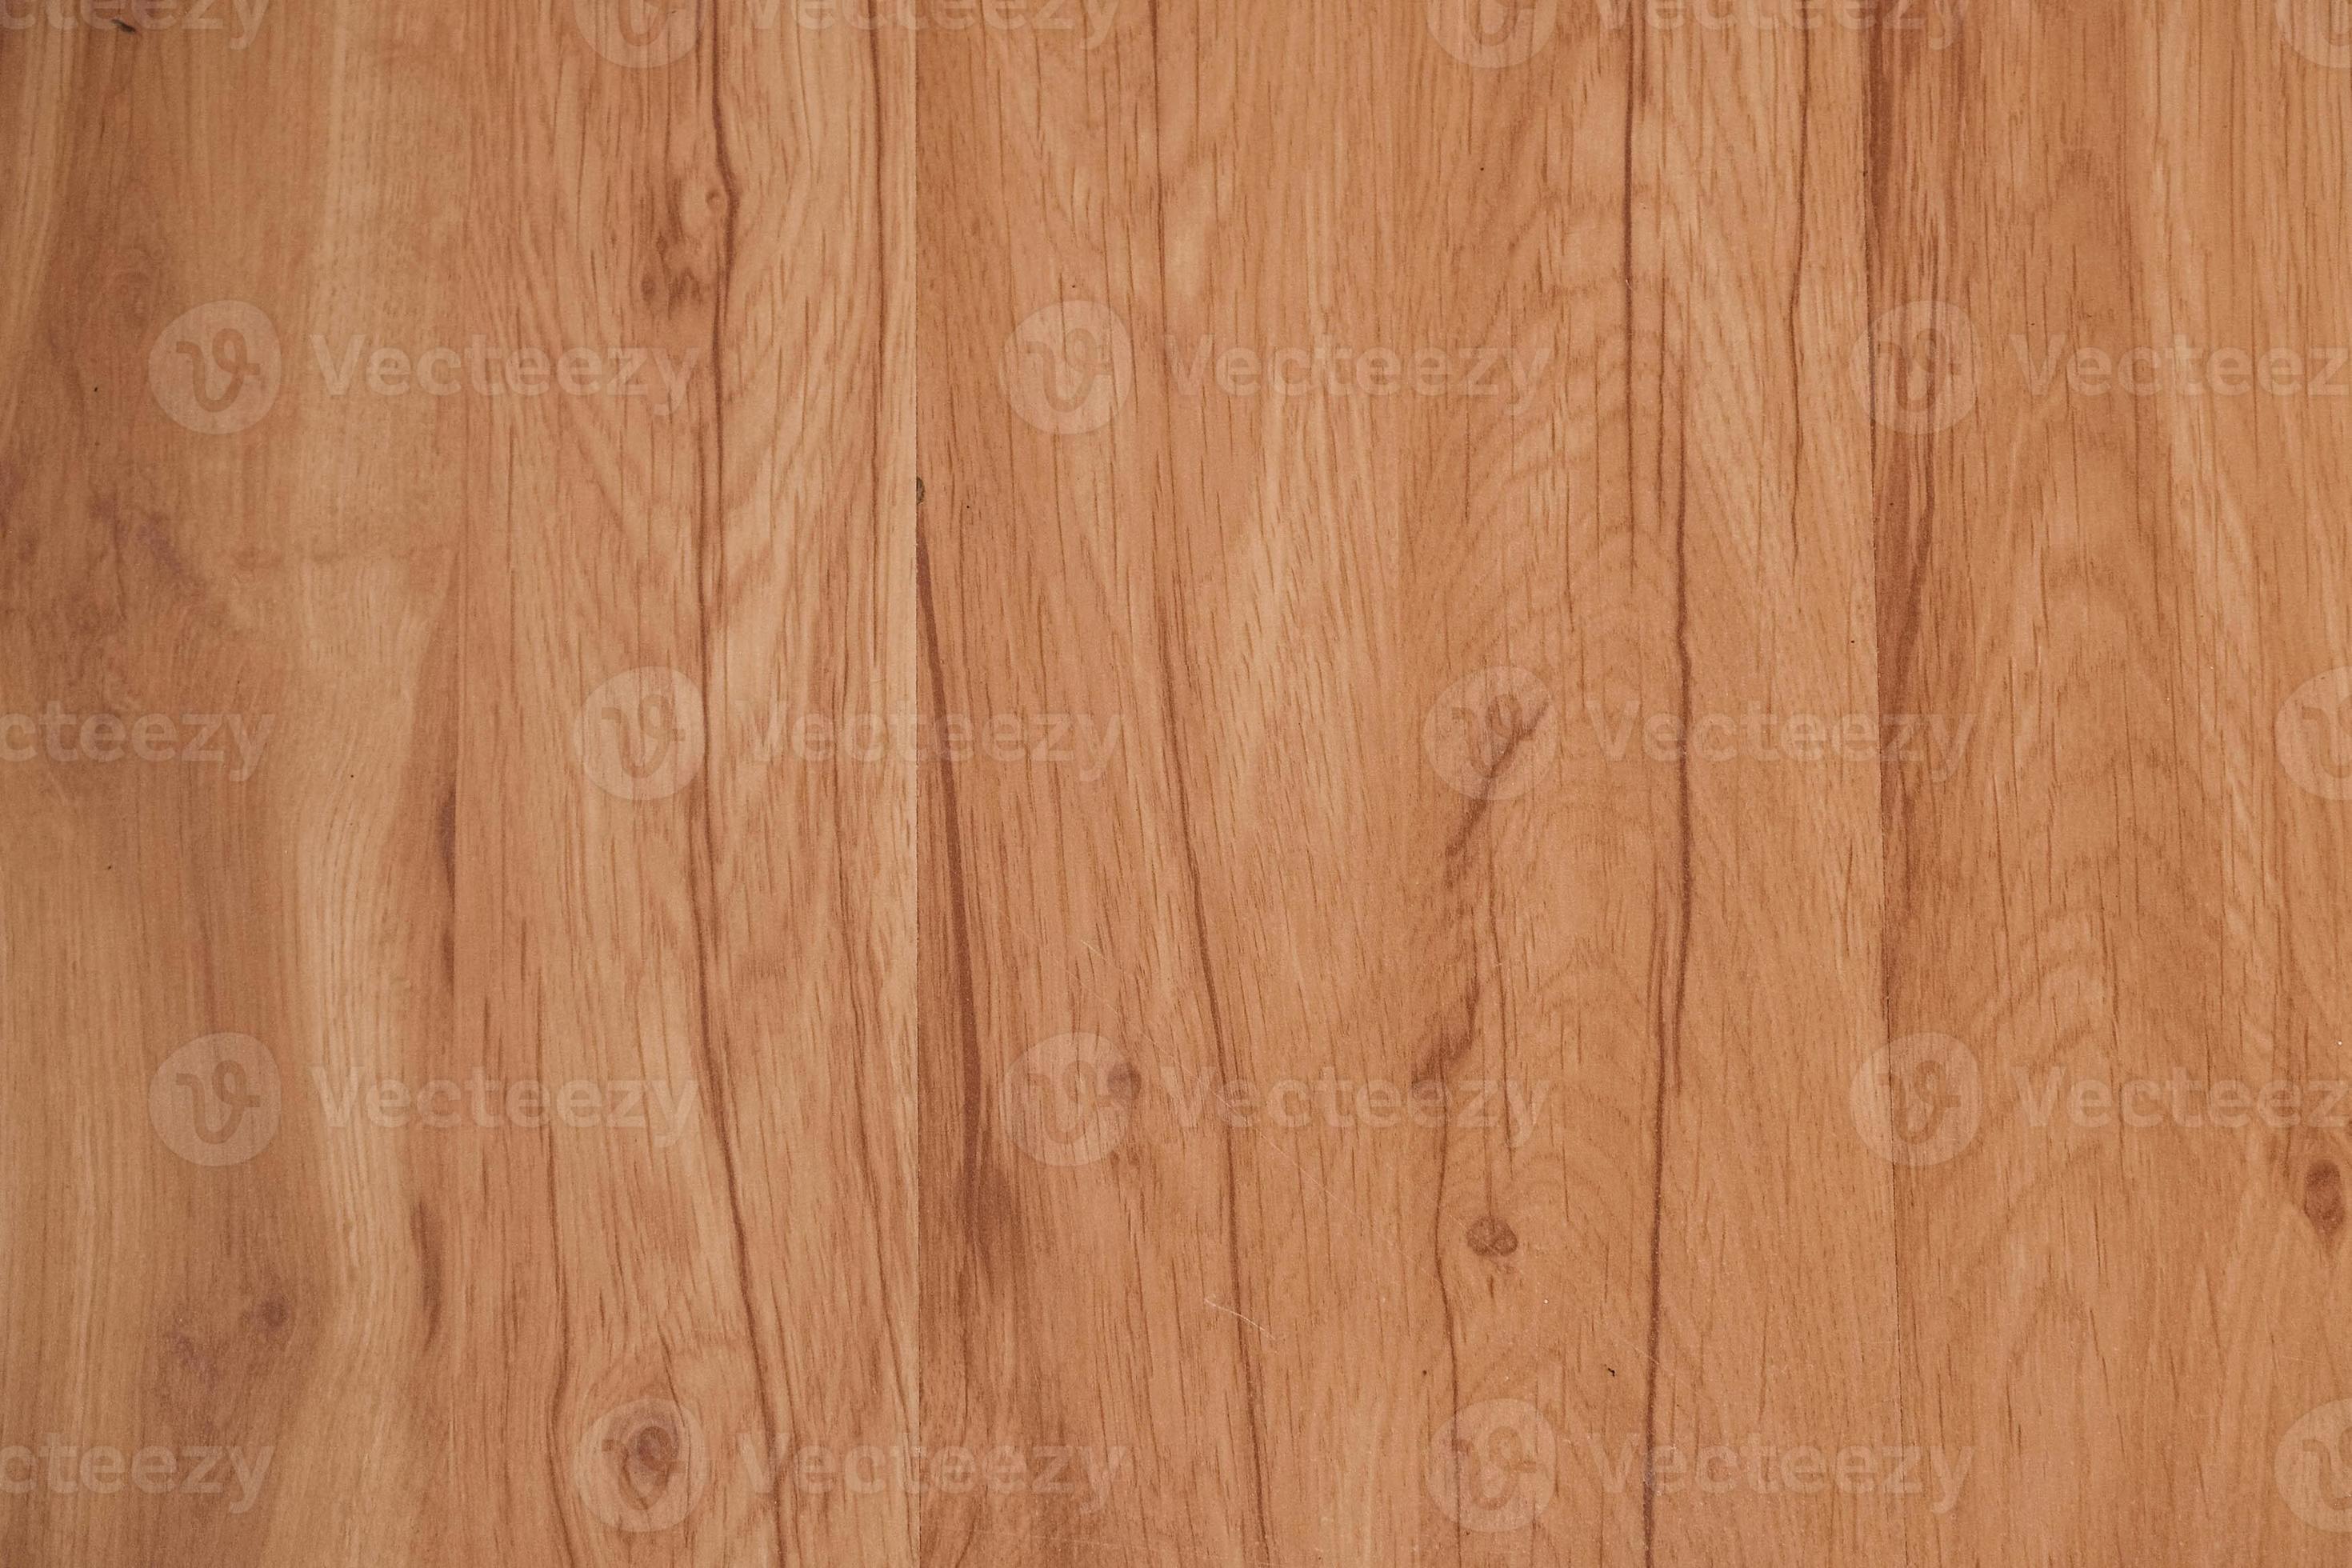 Natural light oak wood texture on furniture surface as background image.  Copy, empty space for text 5179259 Stock Photo at Vecteezy